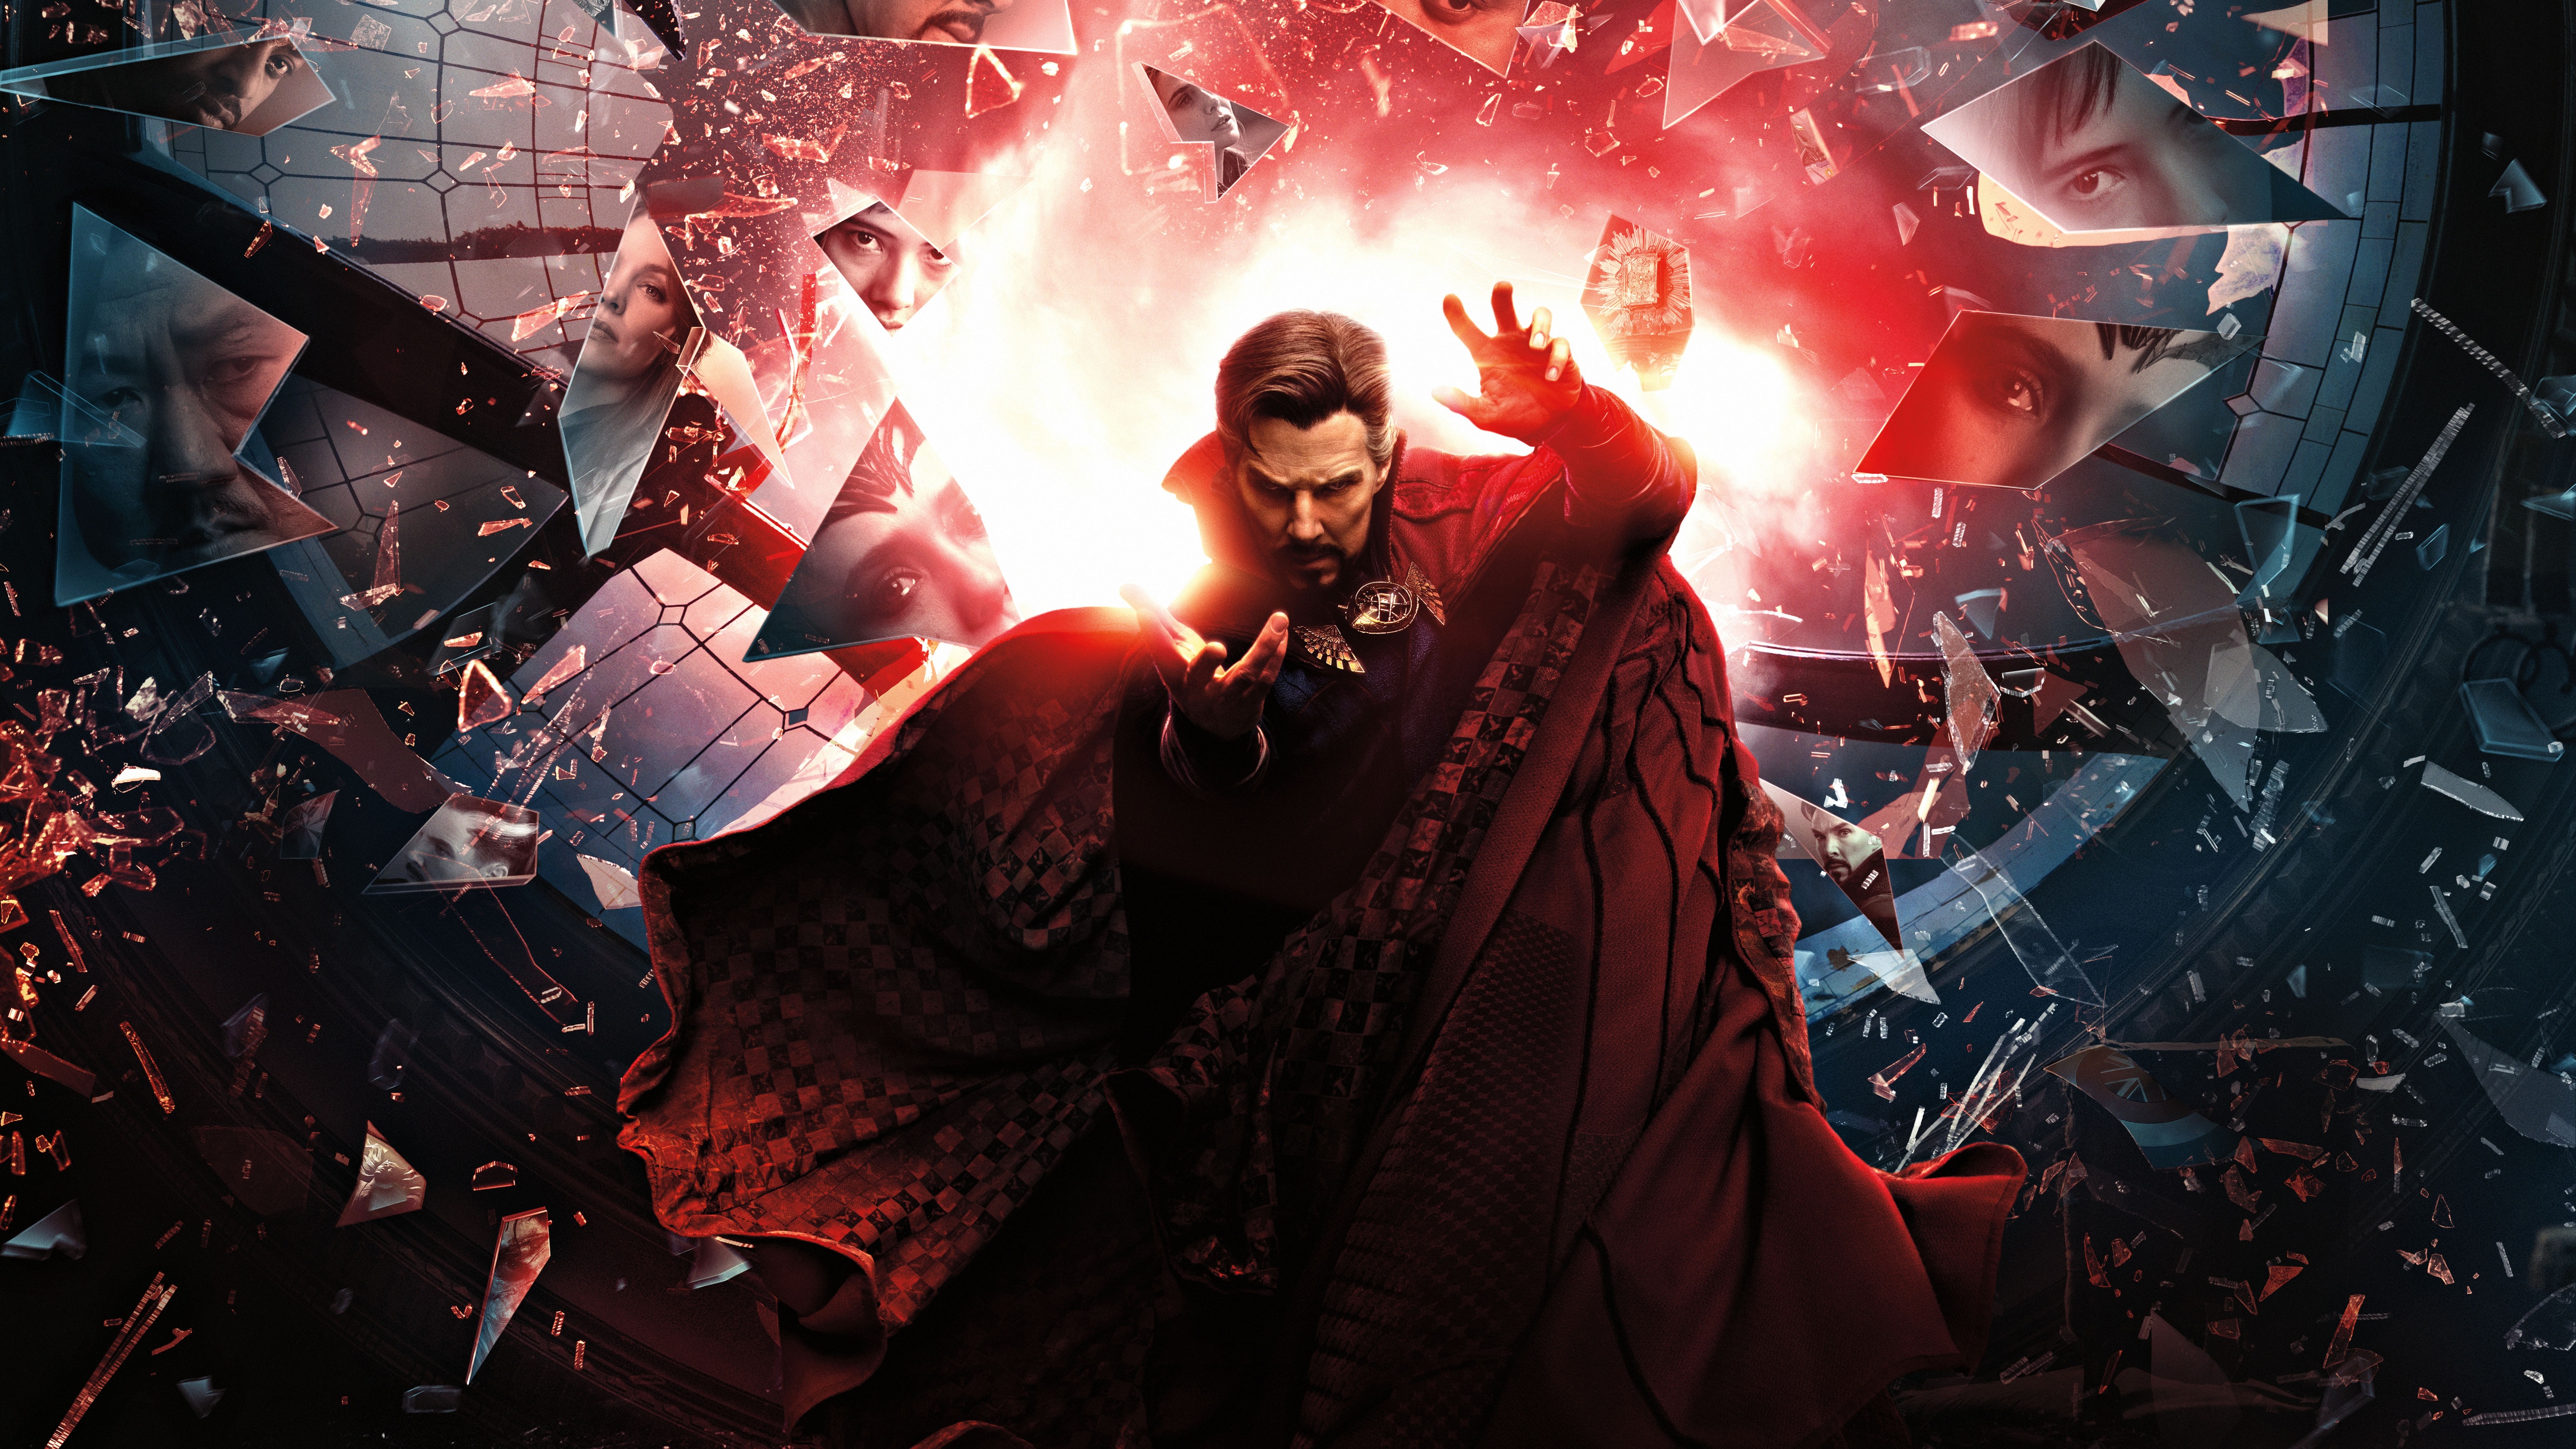 Doctor Strange in the Multiverse of Madness Wallpaper 4K, 2022 Movies, Dr Stephen Strange, Movies